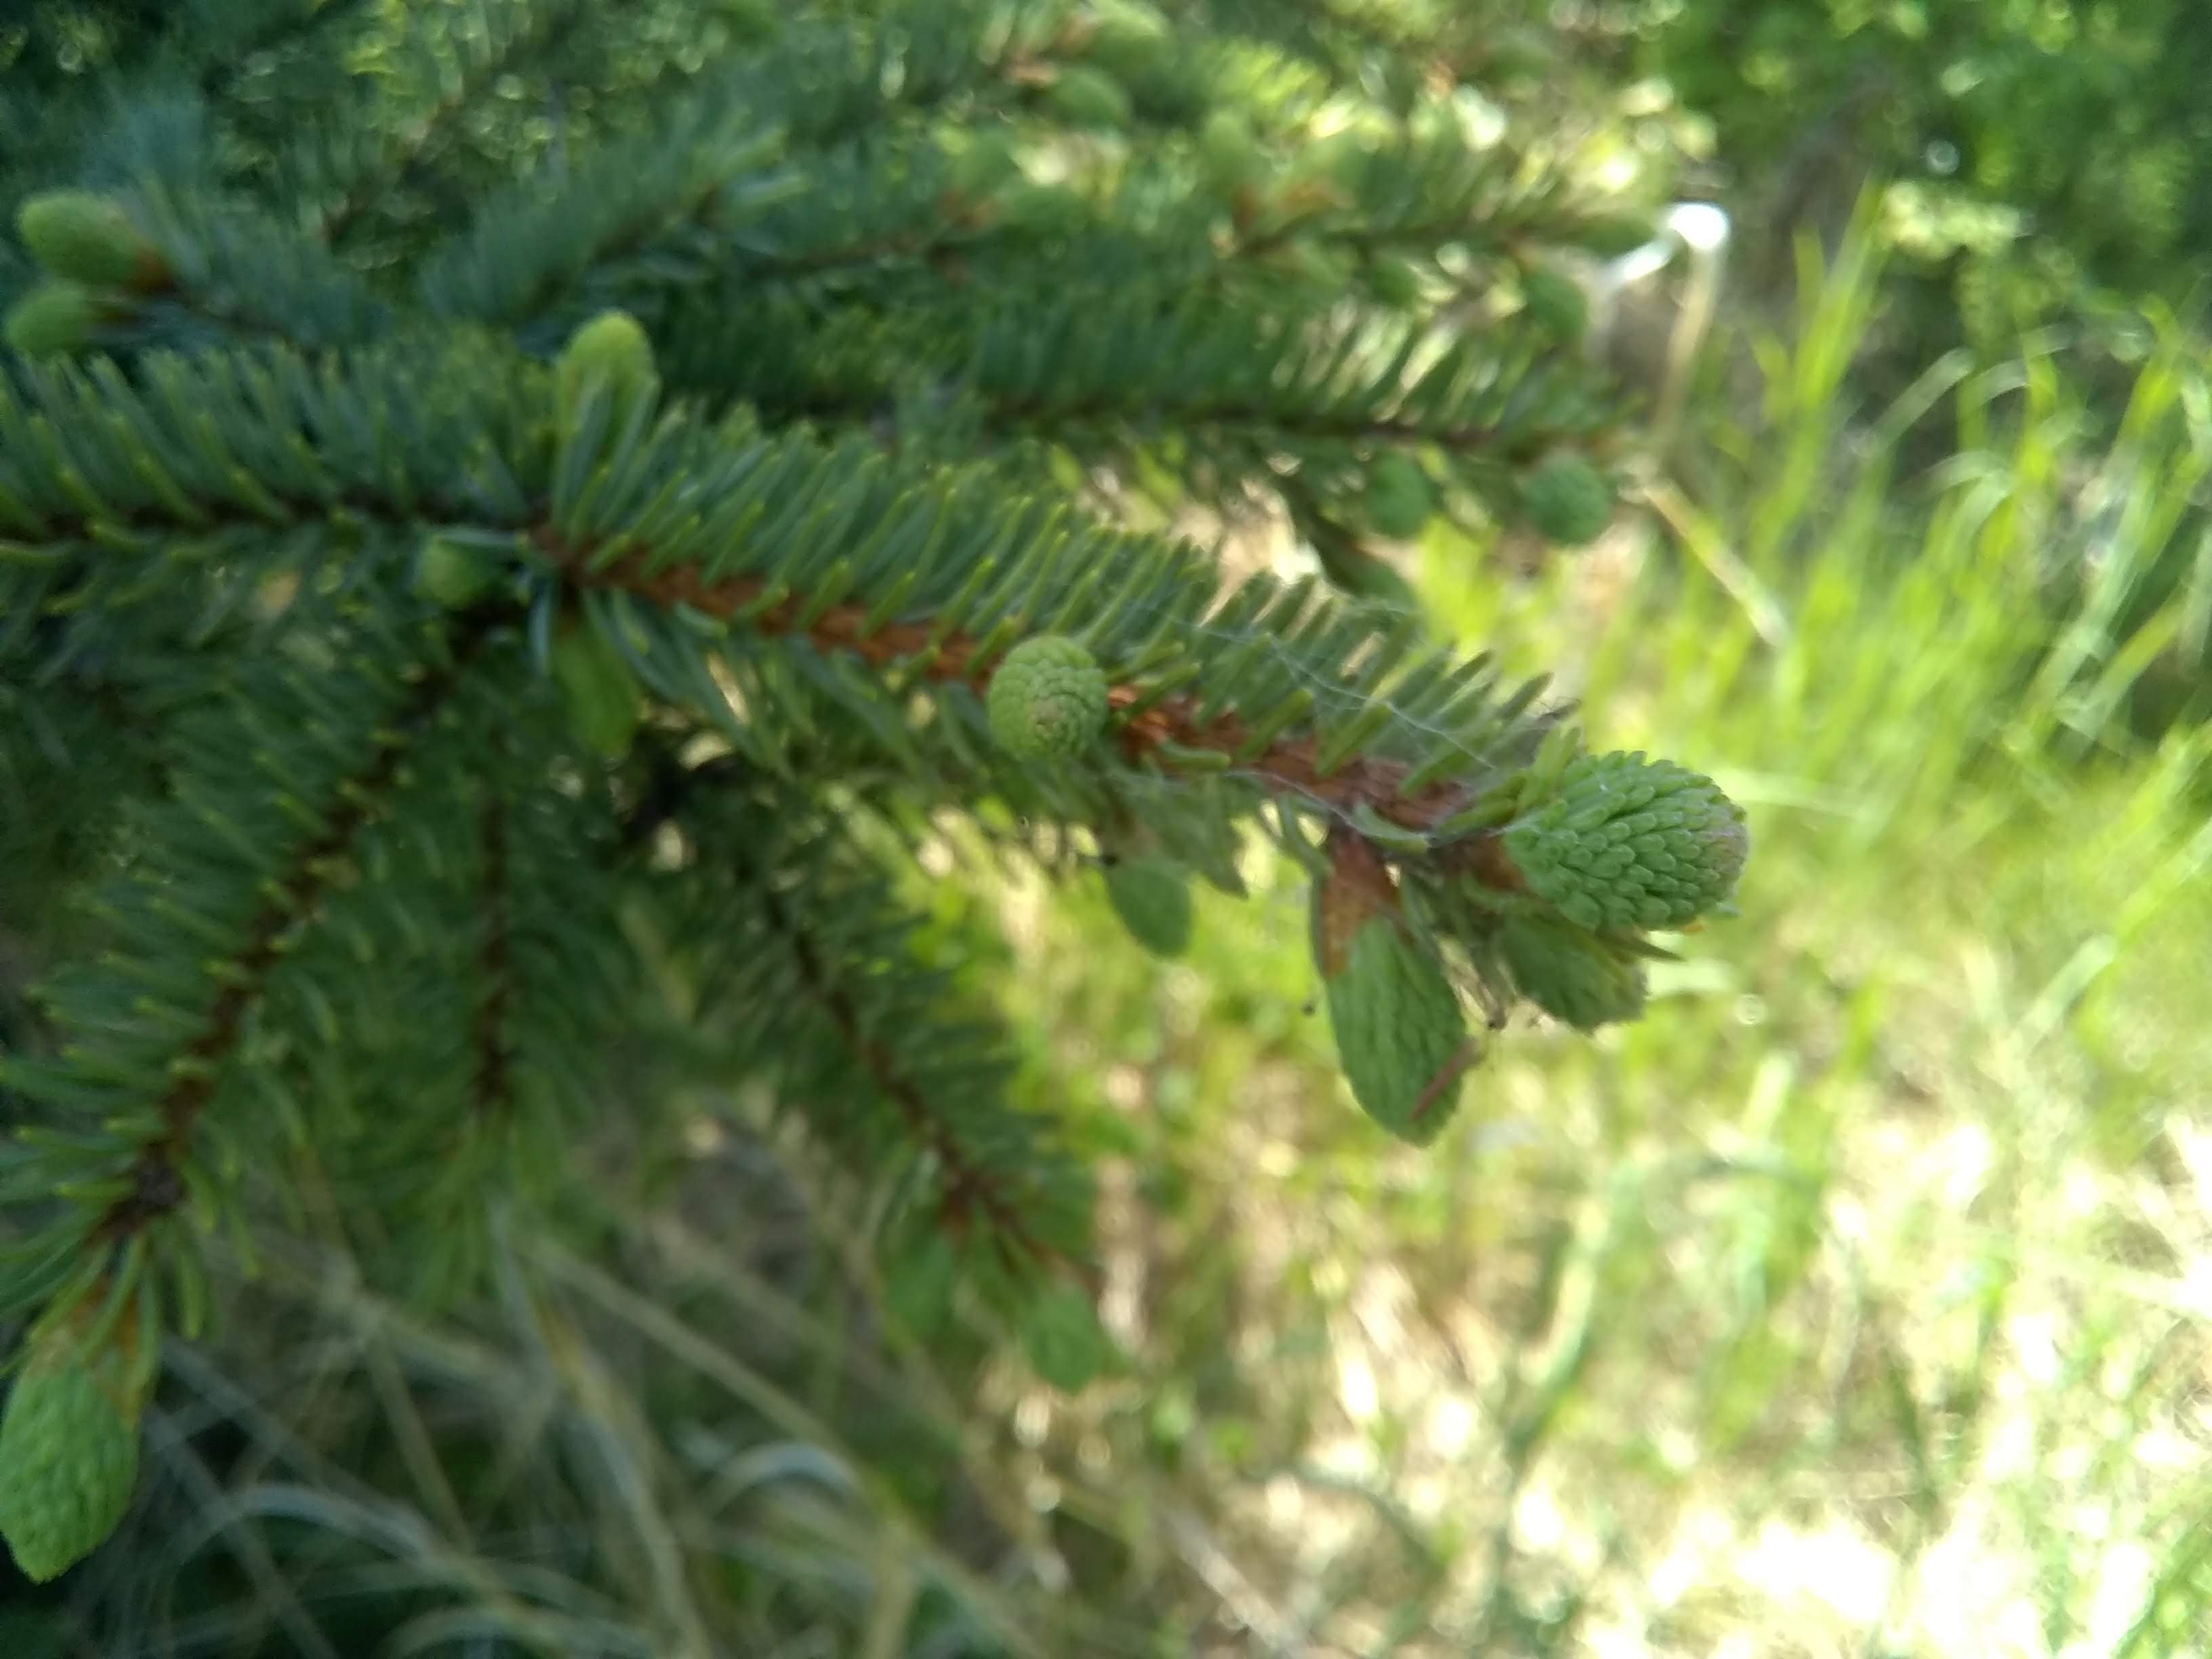 Spruce, a type of pine